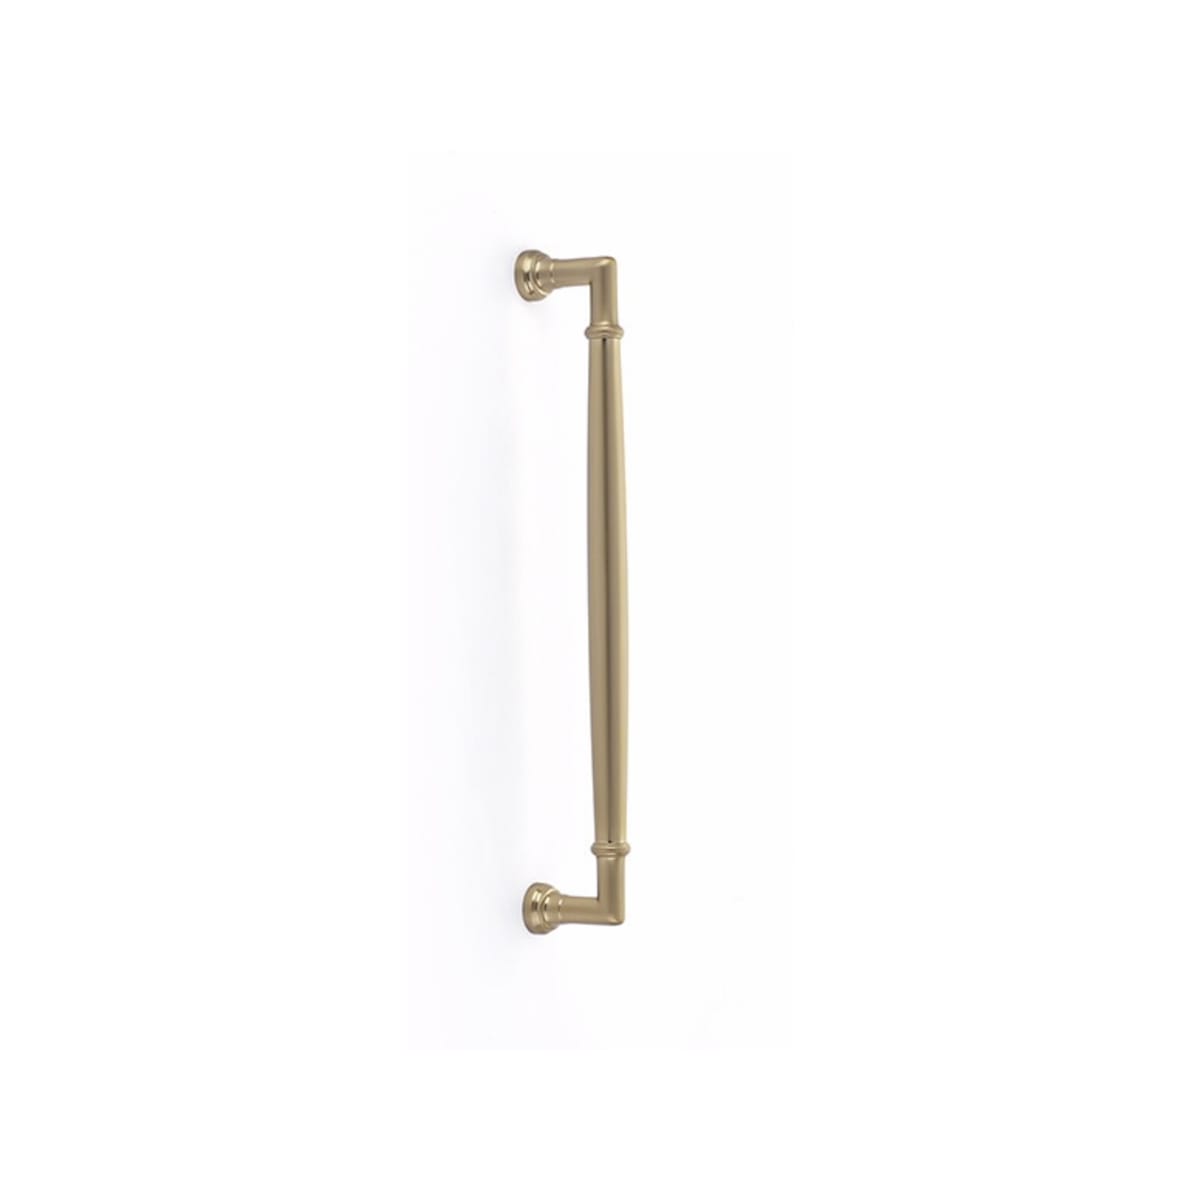 CS86913US4 - Concealed Surface Mount - Westwood Appliance Pull - 18" - Satin Brass